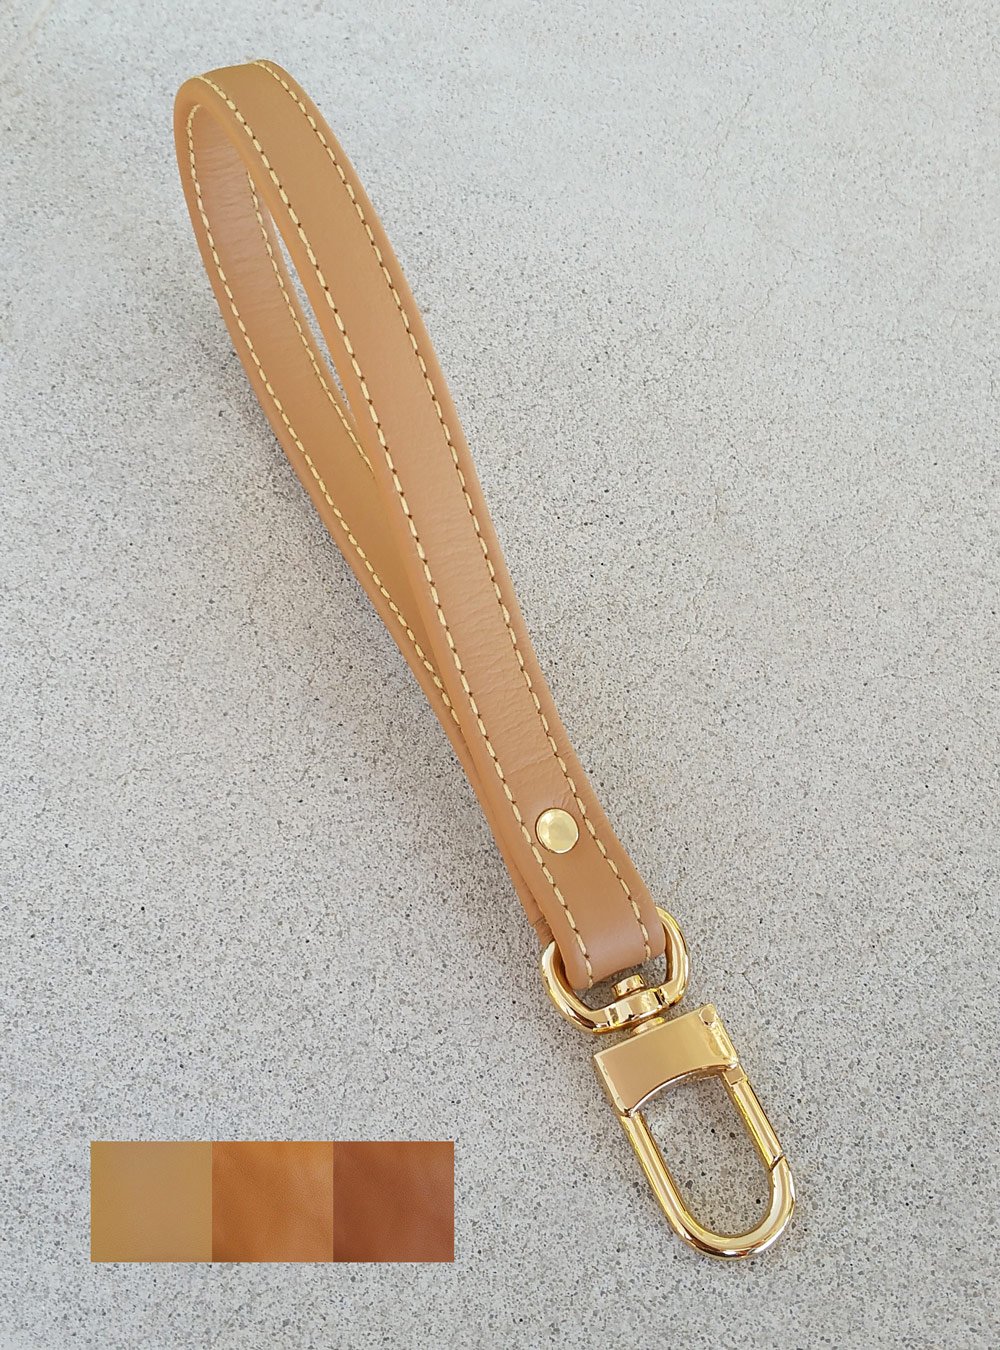 Tan Leather Wrist Strap with Yellow Stitching - Choose Leather Color & Gold or Nickel #16LG ...